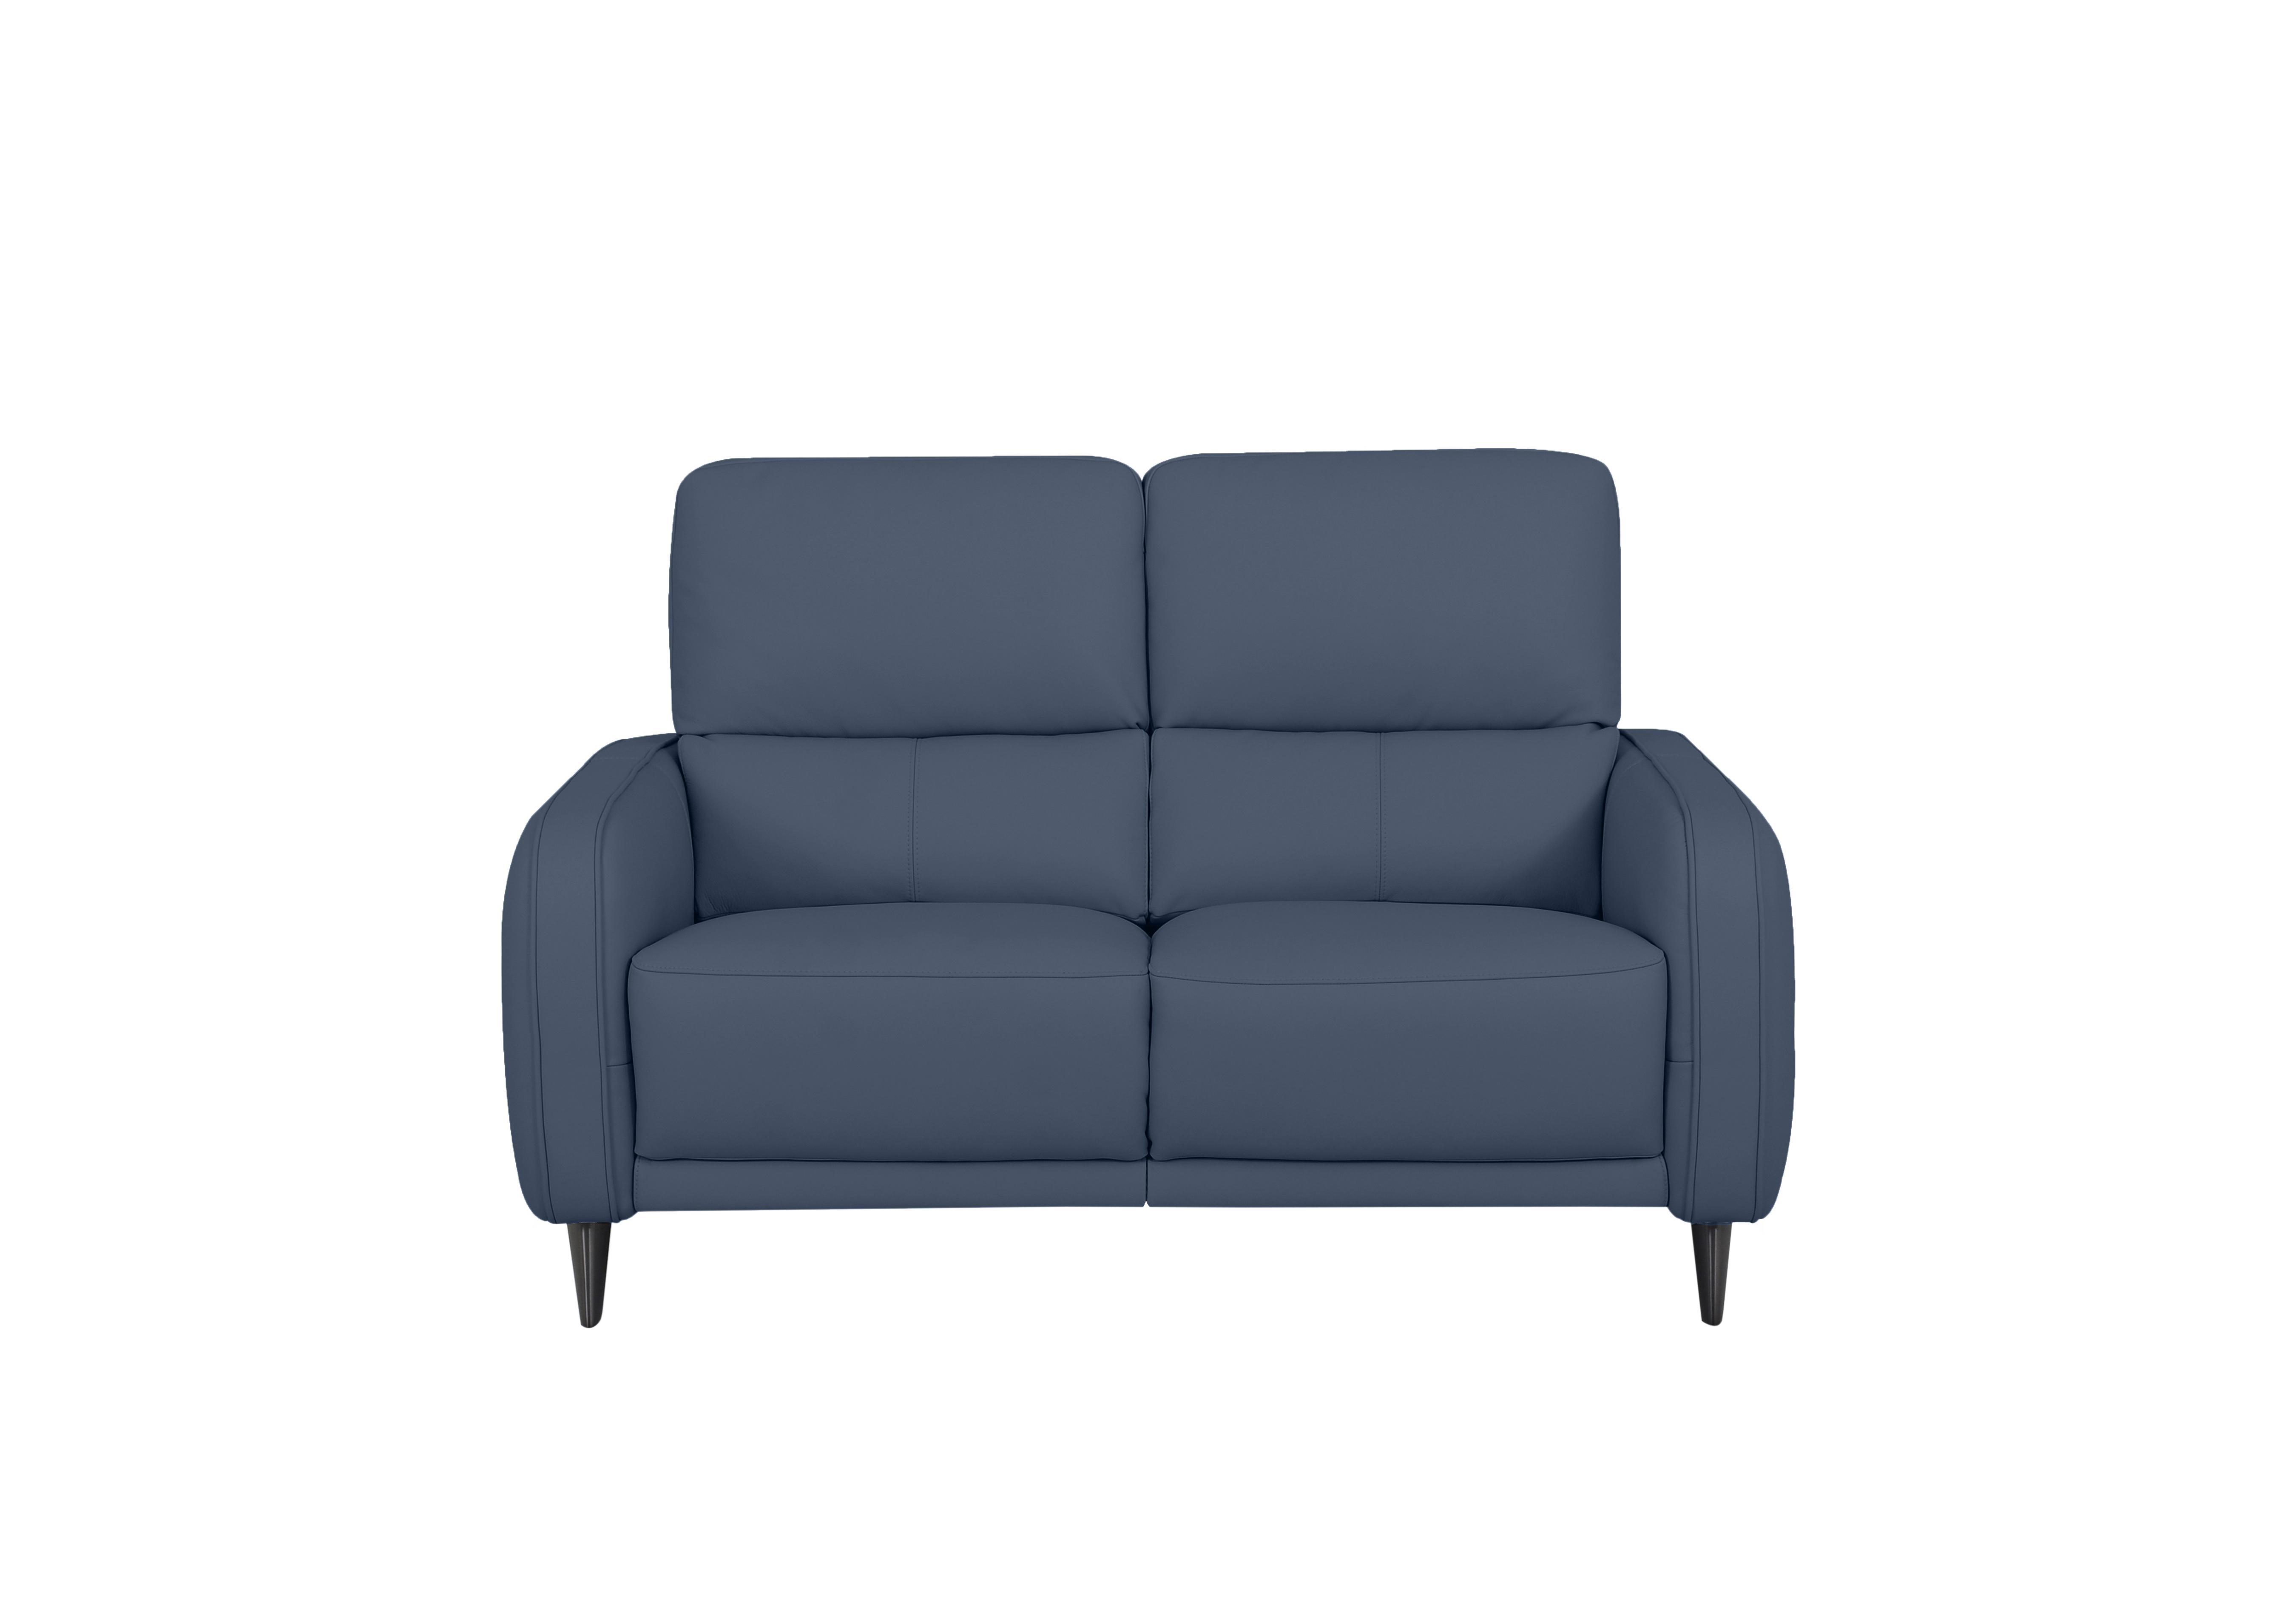 Logan 2 Seater Leather Sofa in Np-518e Ocean Blue on Furniture Village